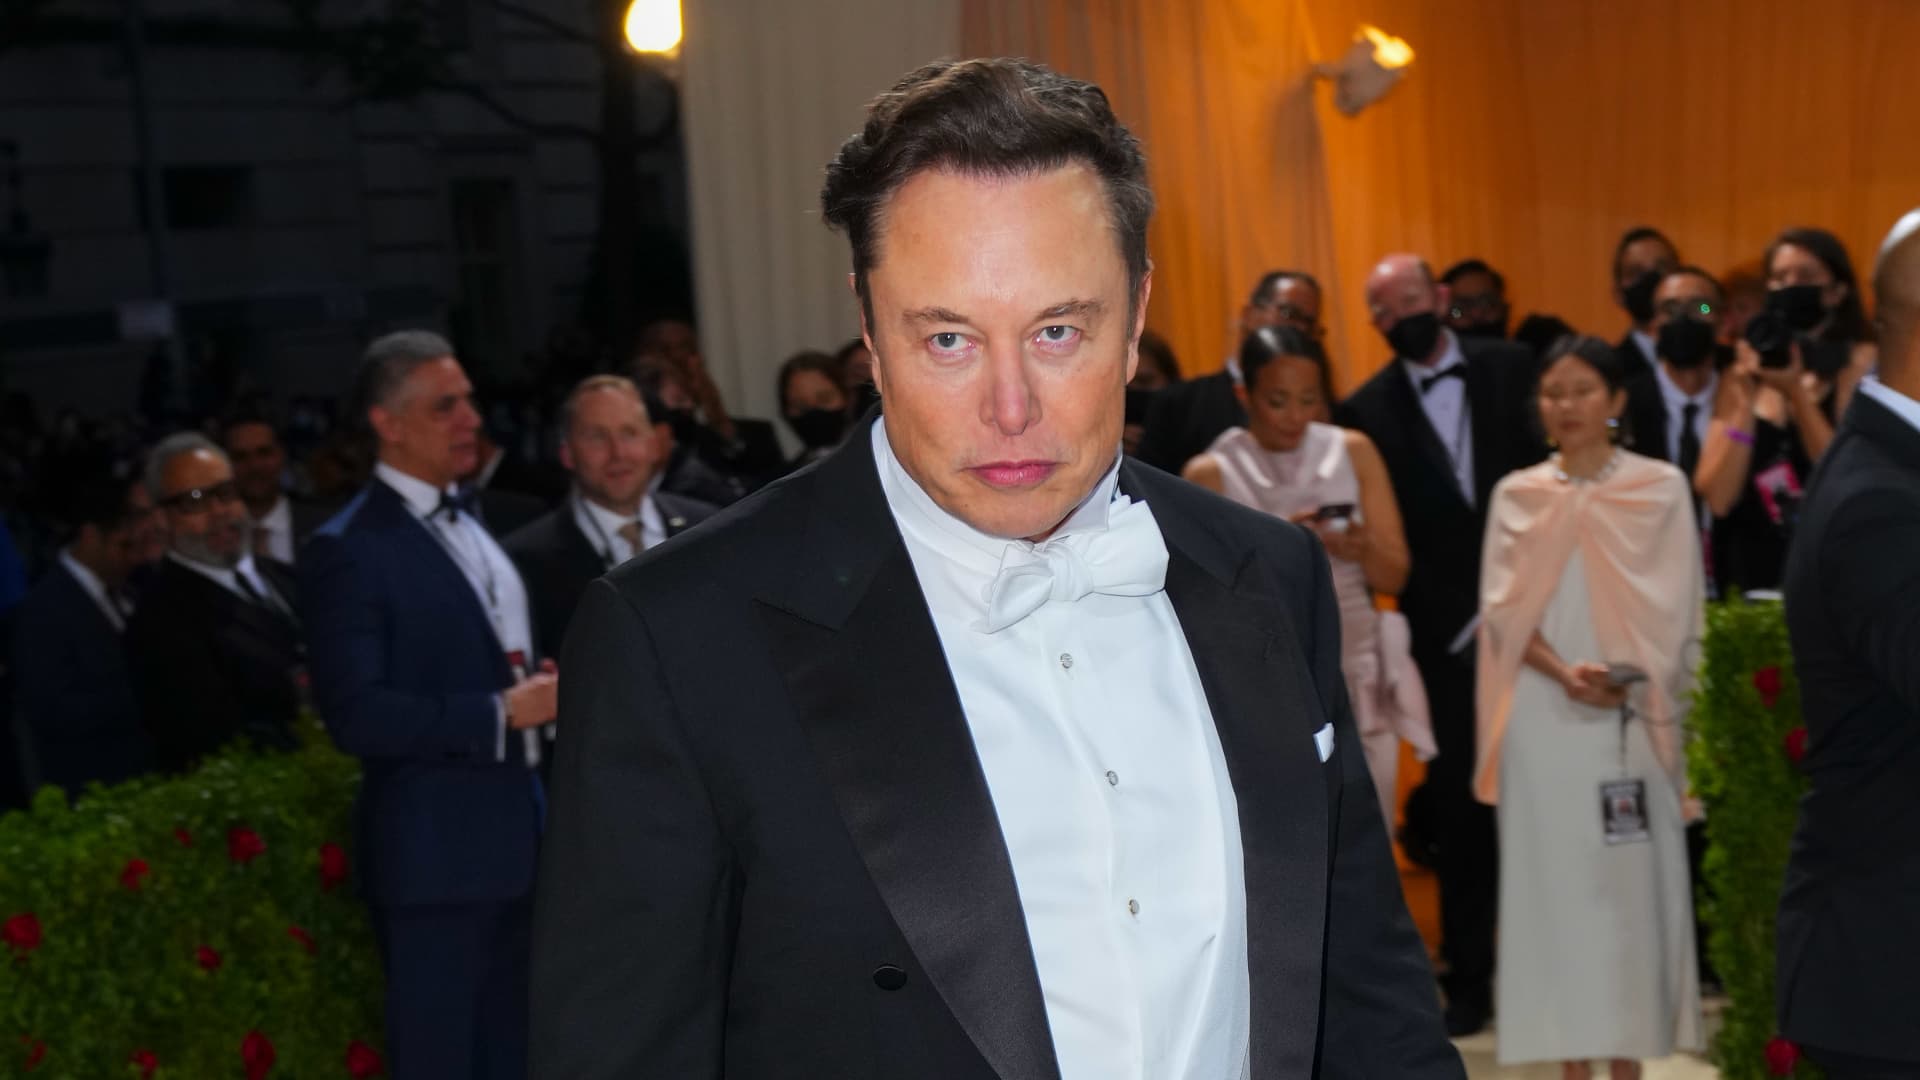 Tesla stock has dropped more than 35% since Elon Musk first said he'd buy Twitter